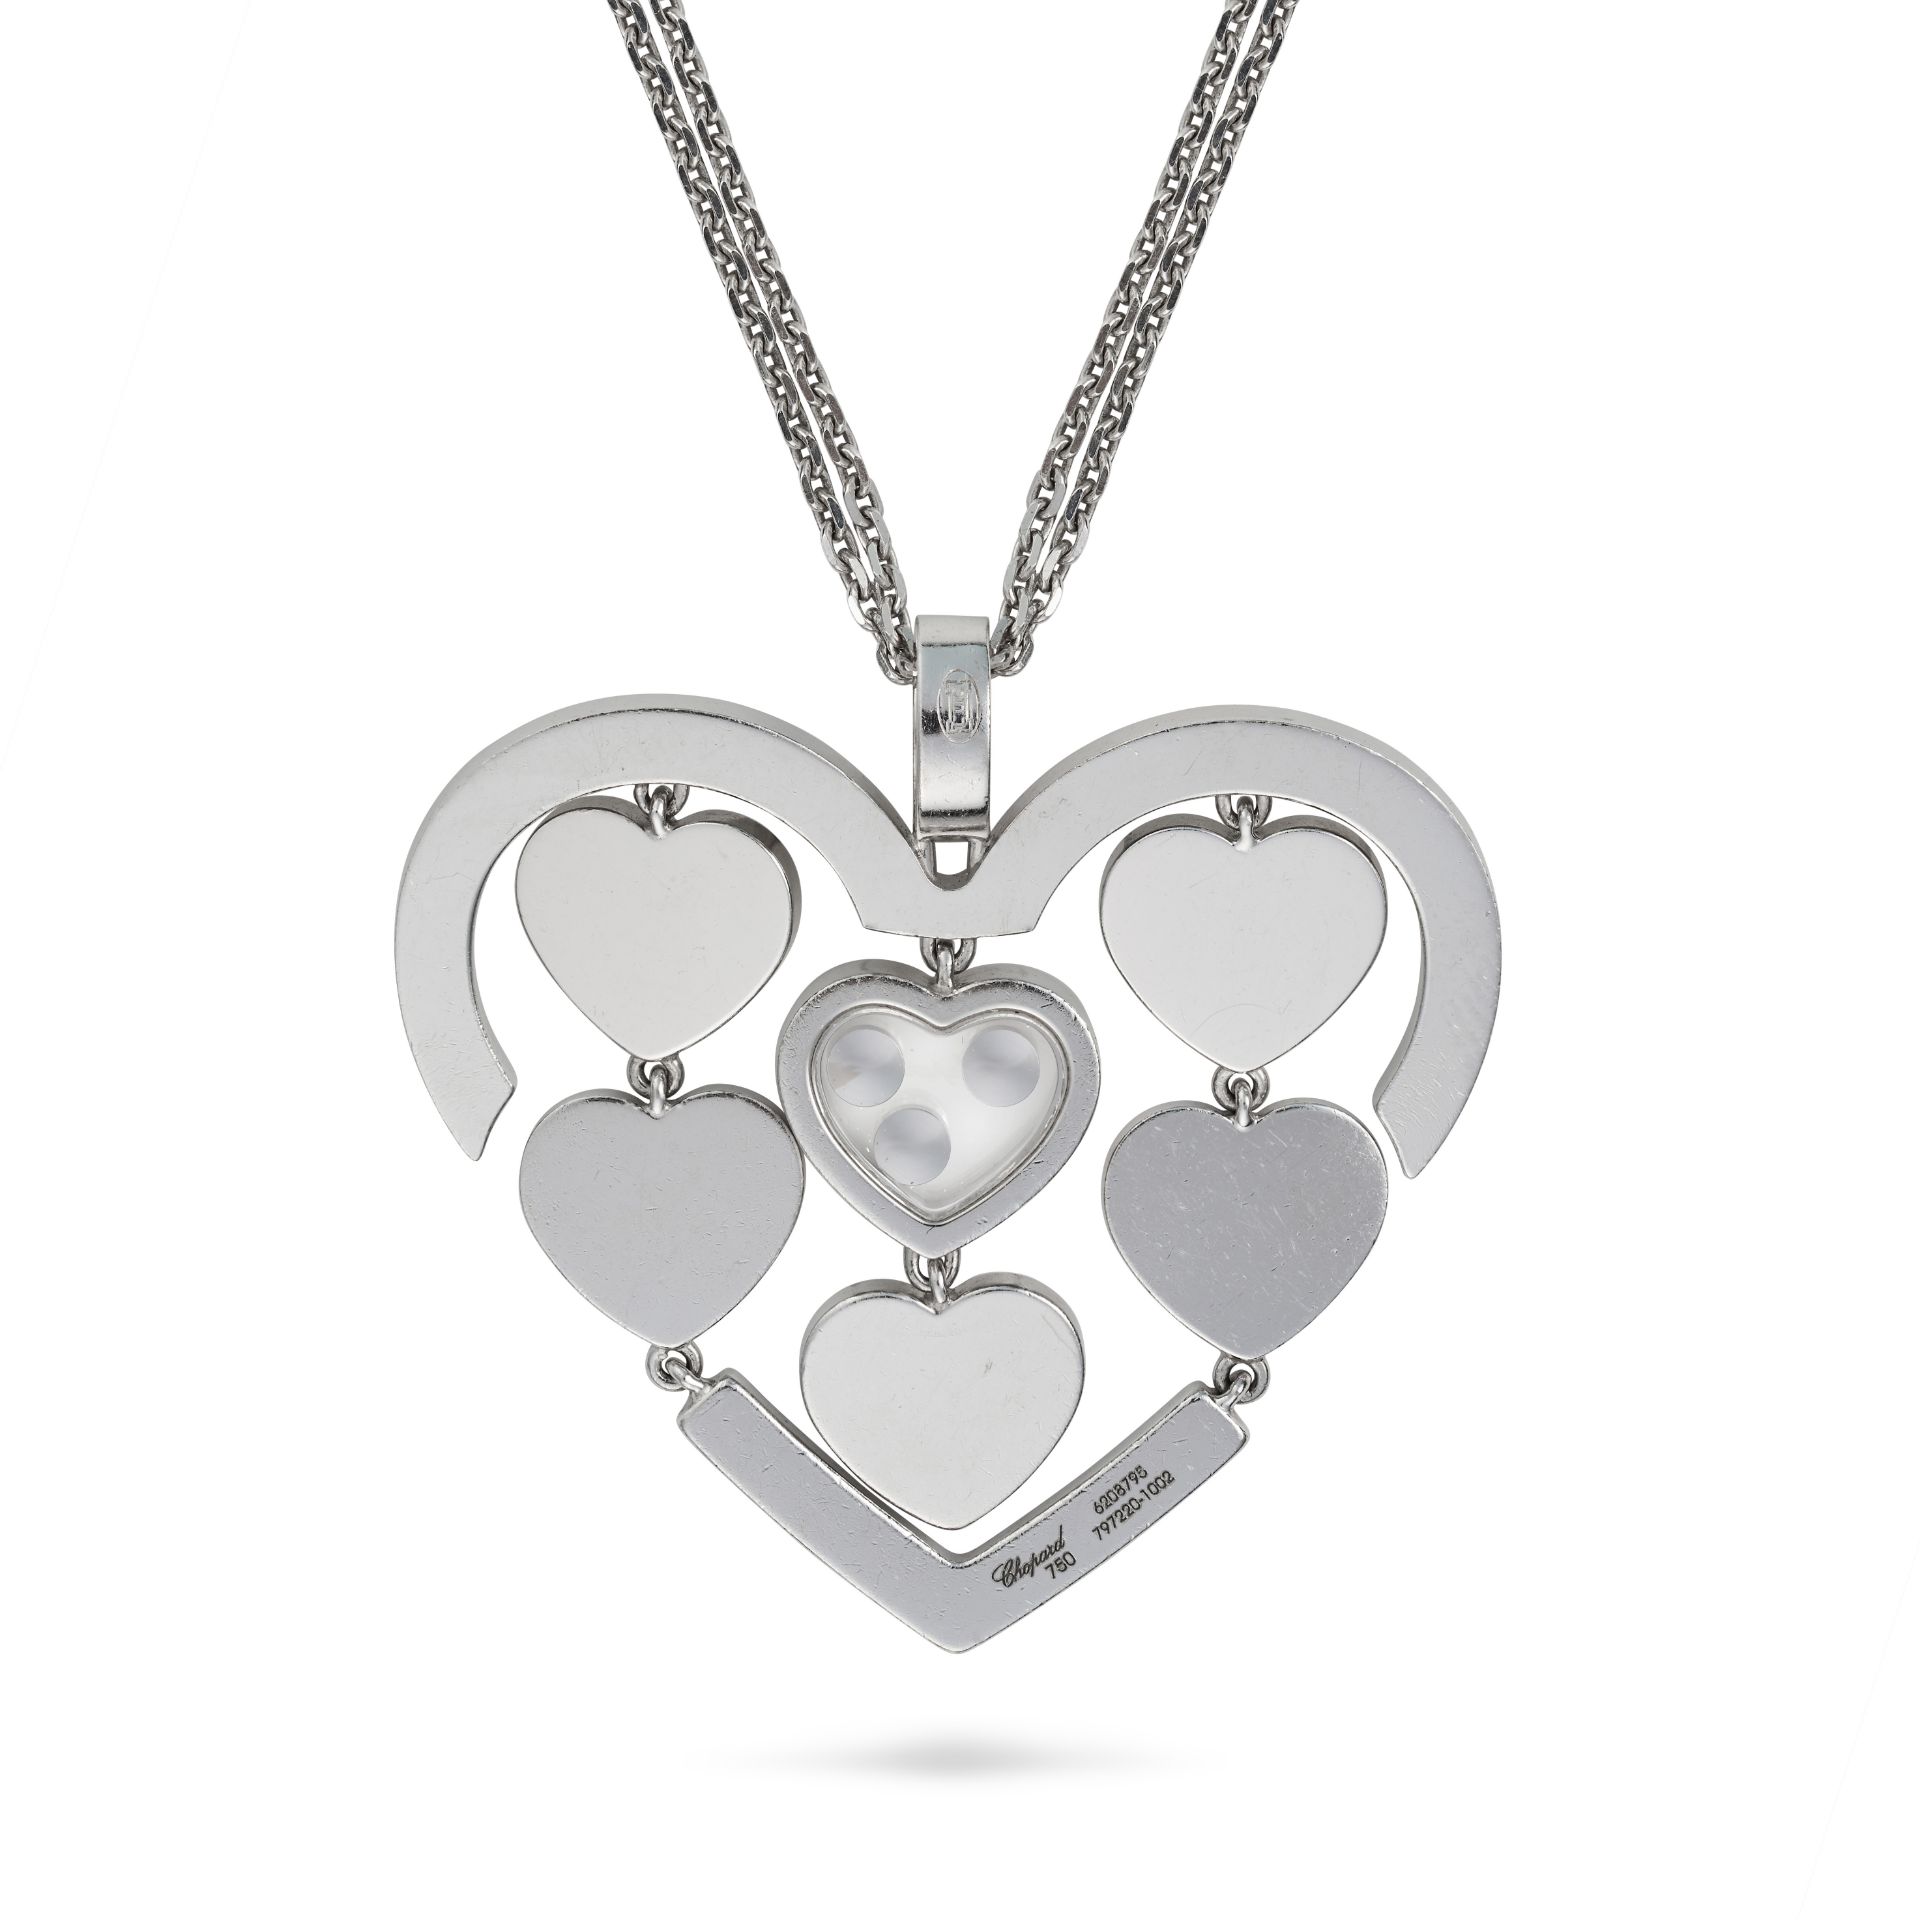 CHOPARD, A DIAMOND HAPPY AMORE PENDANT NECKLACE the openwork pendant designed as a heart set with... - Image 2 of 2